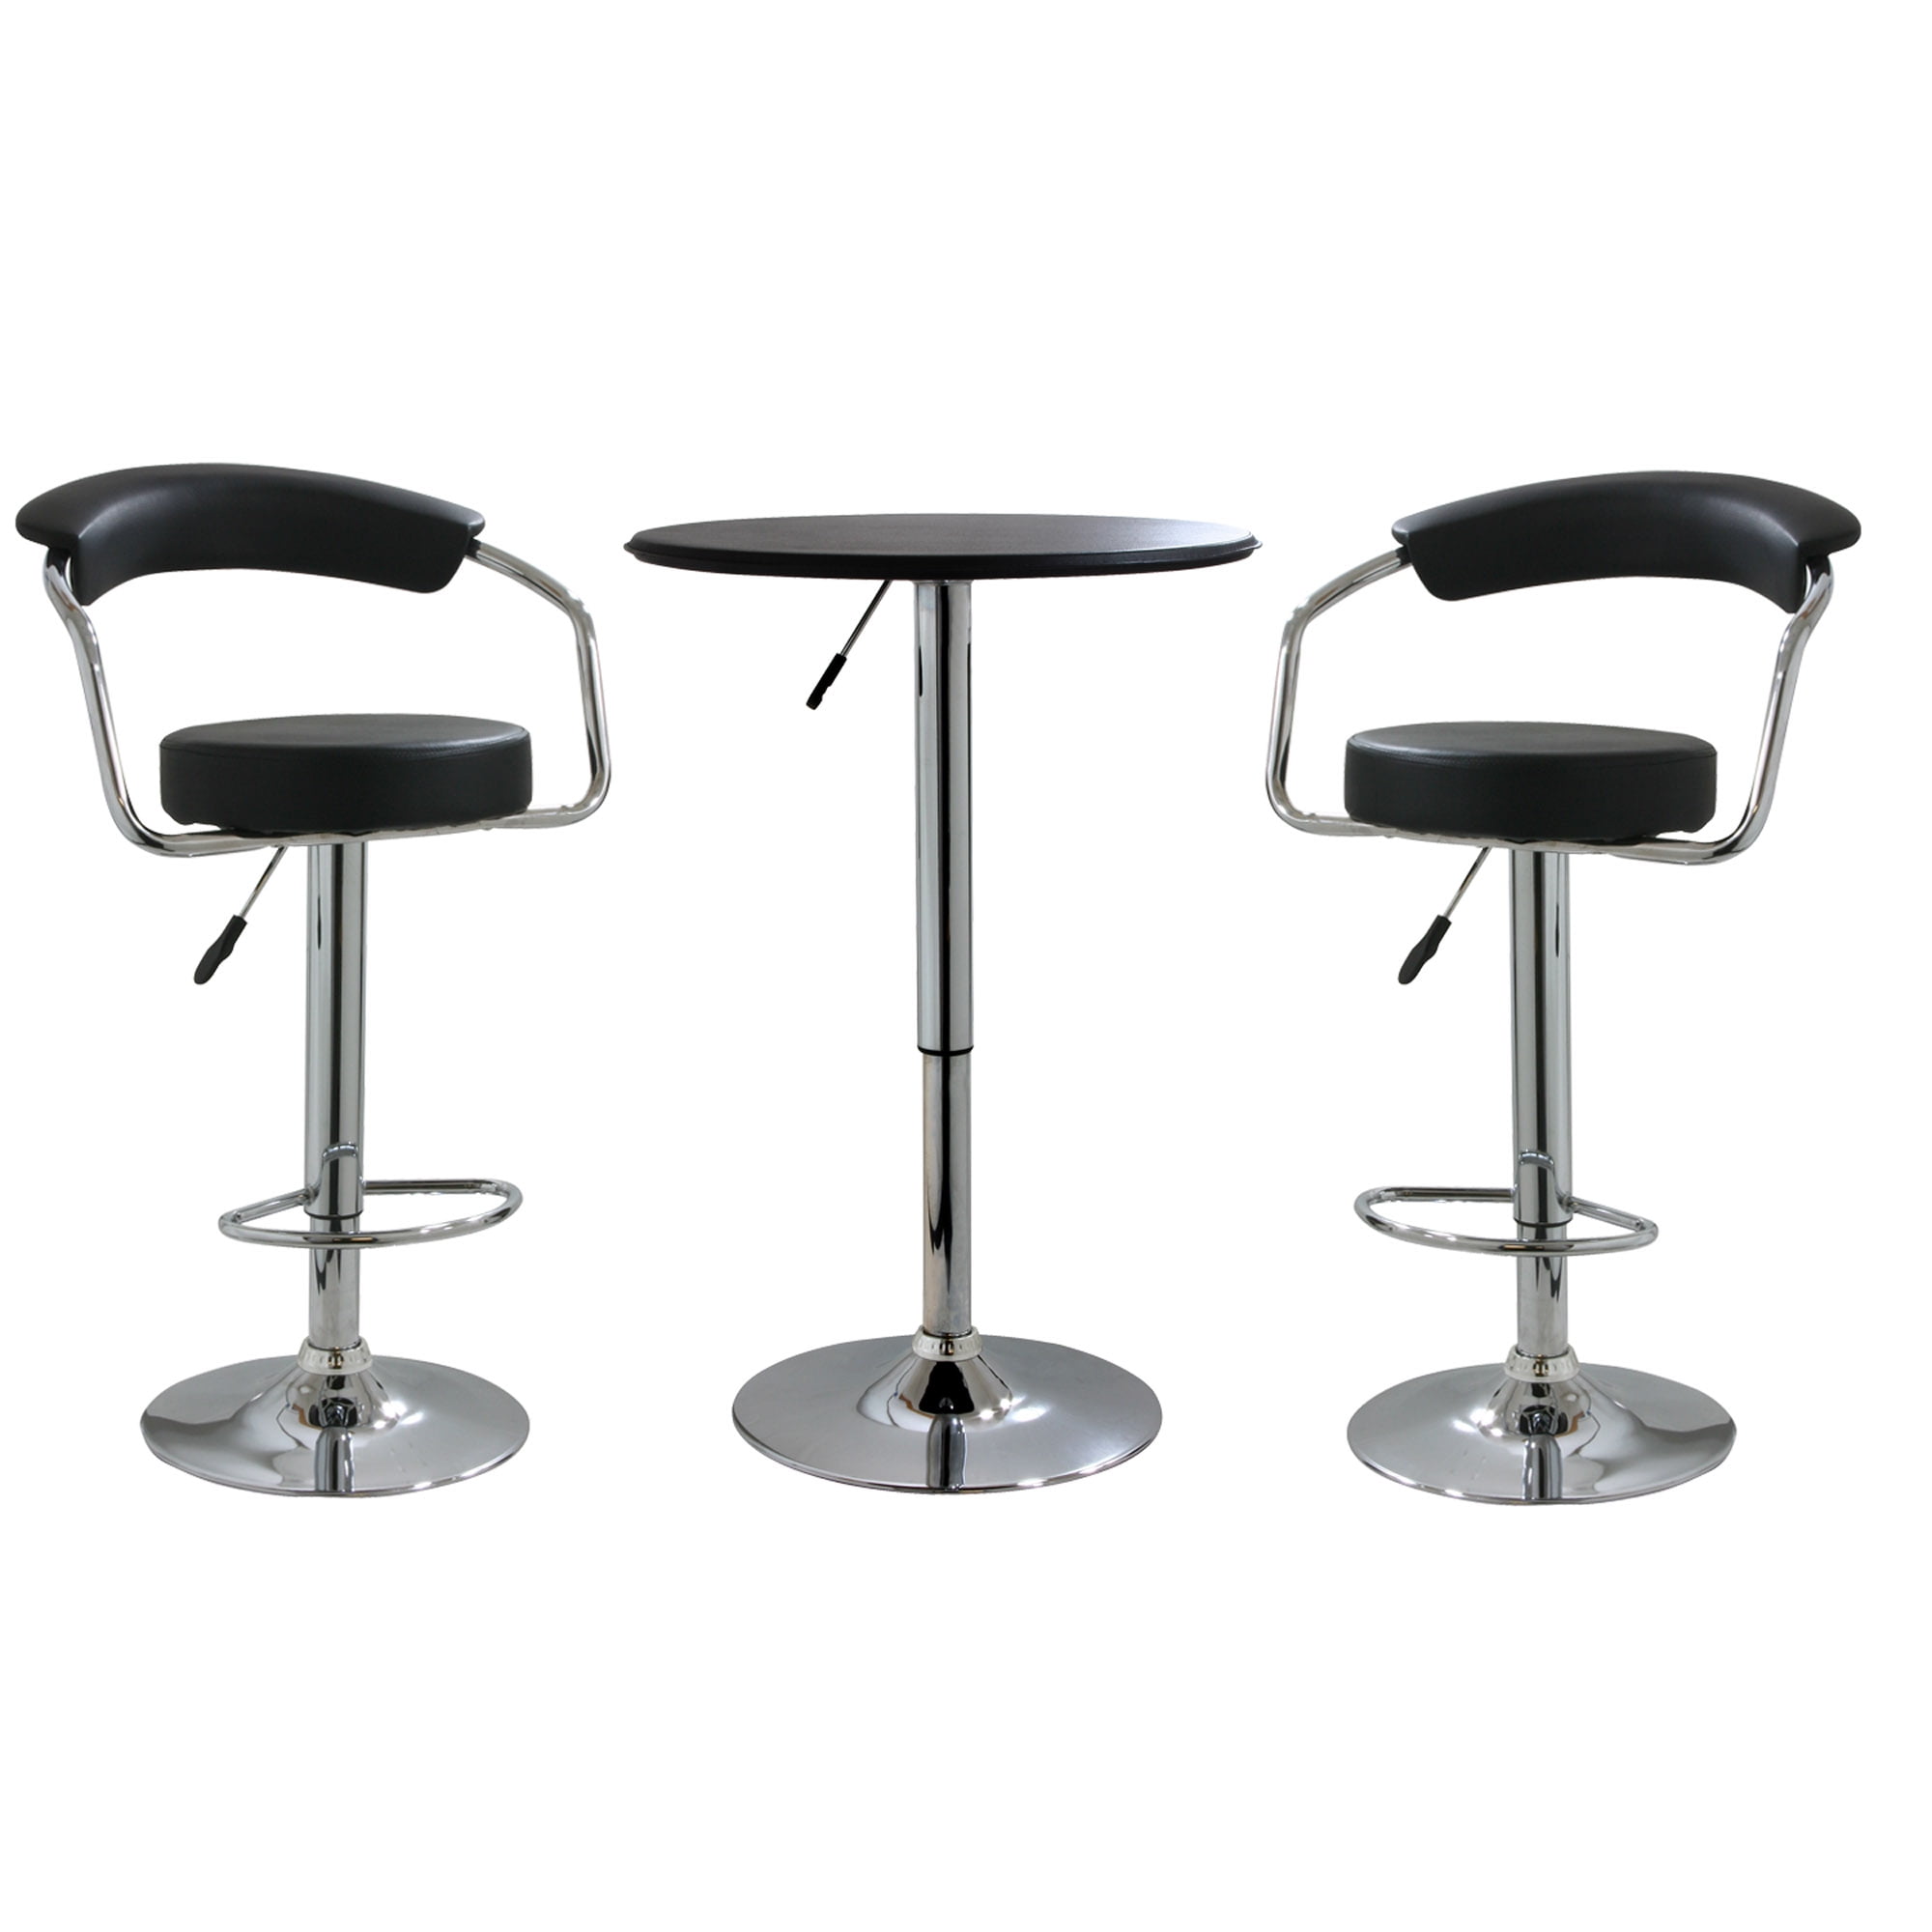 Set of 3 Bar Set Height Adjustable Round Bar Table with 2 Bar Stools Bistro Set Black Bar Table Blackish-Green Leather Swivel Barstool Chairs with Chrome Base Footrest for Kitchen Club Pub Breakfast